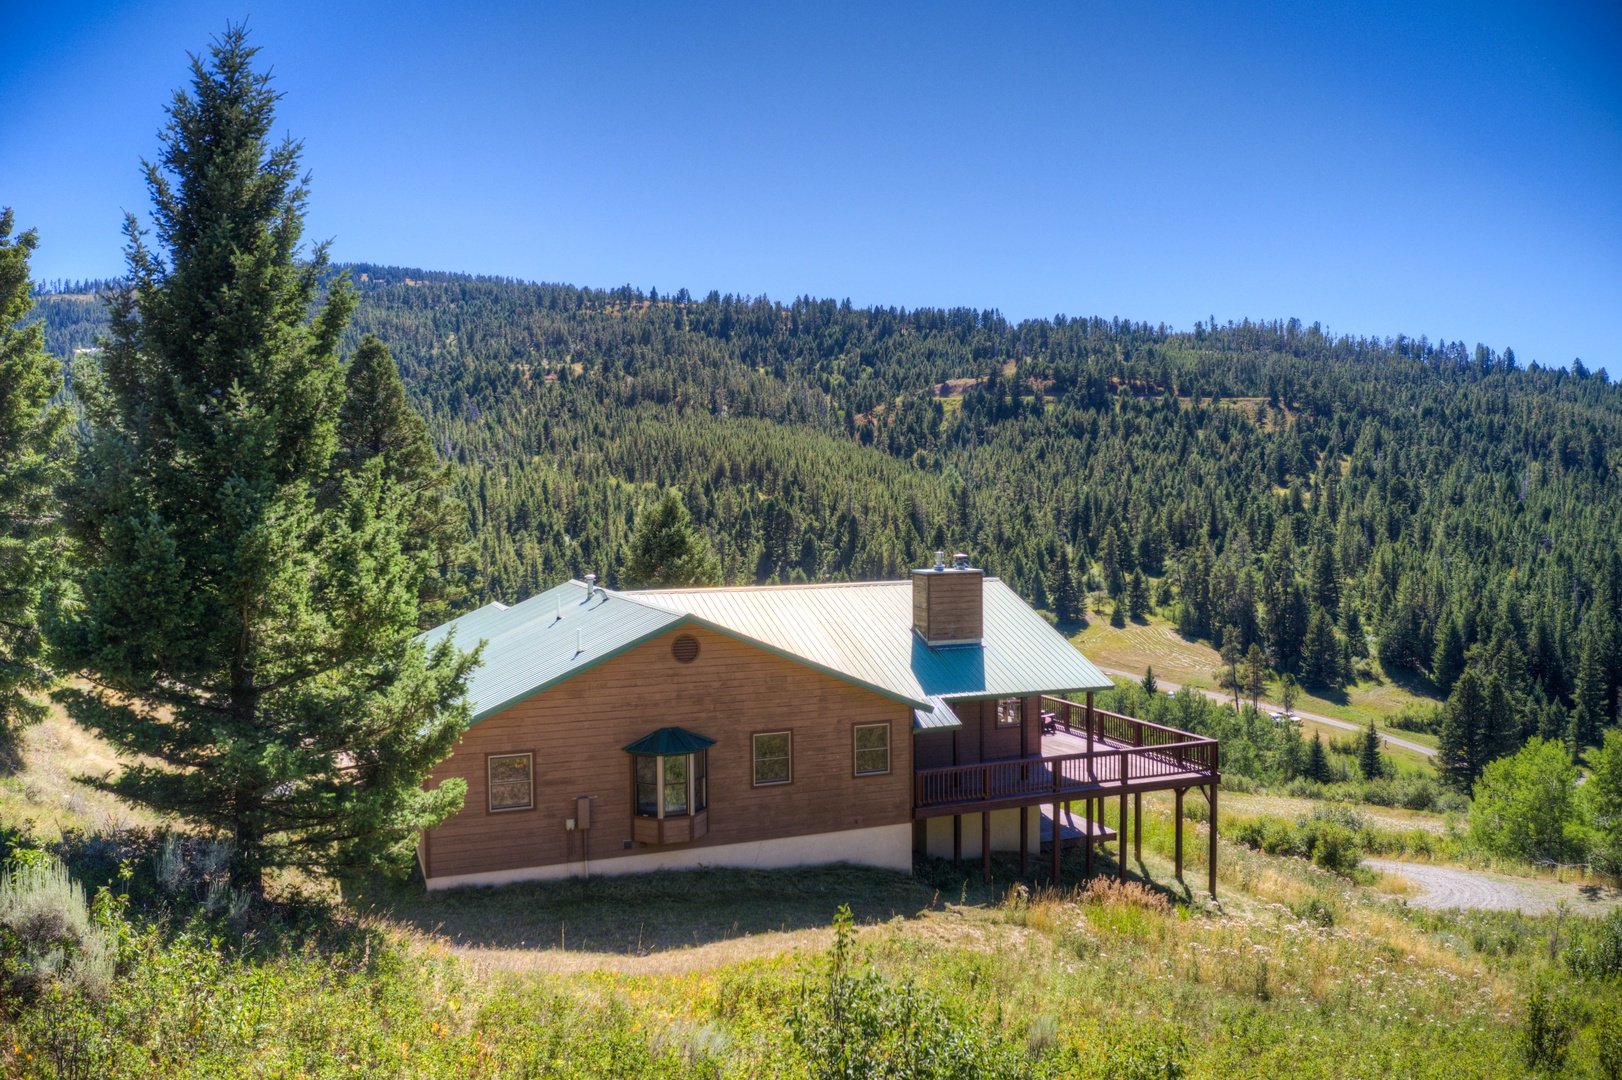 Bozeman Vacation Rentals, The Canyon Lookout - Lovely vacation home for friends and family